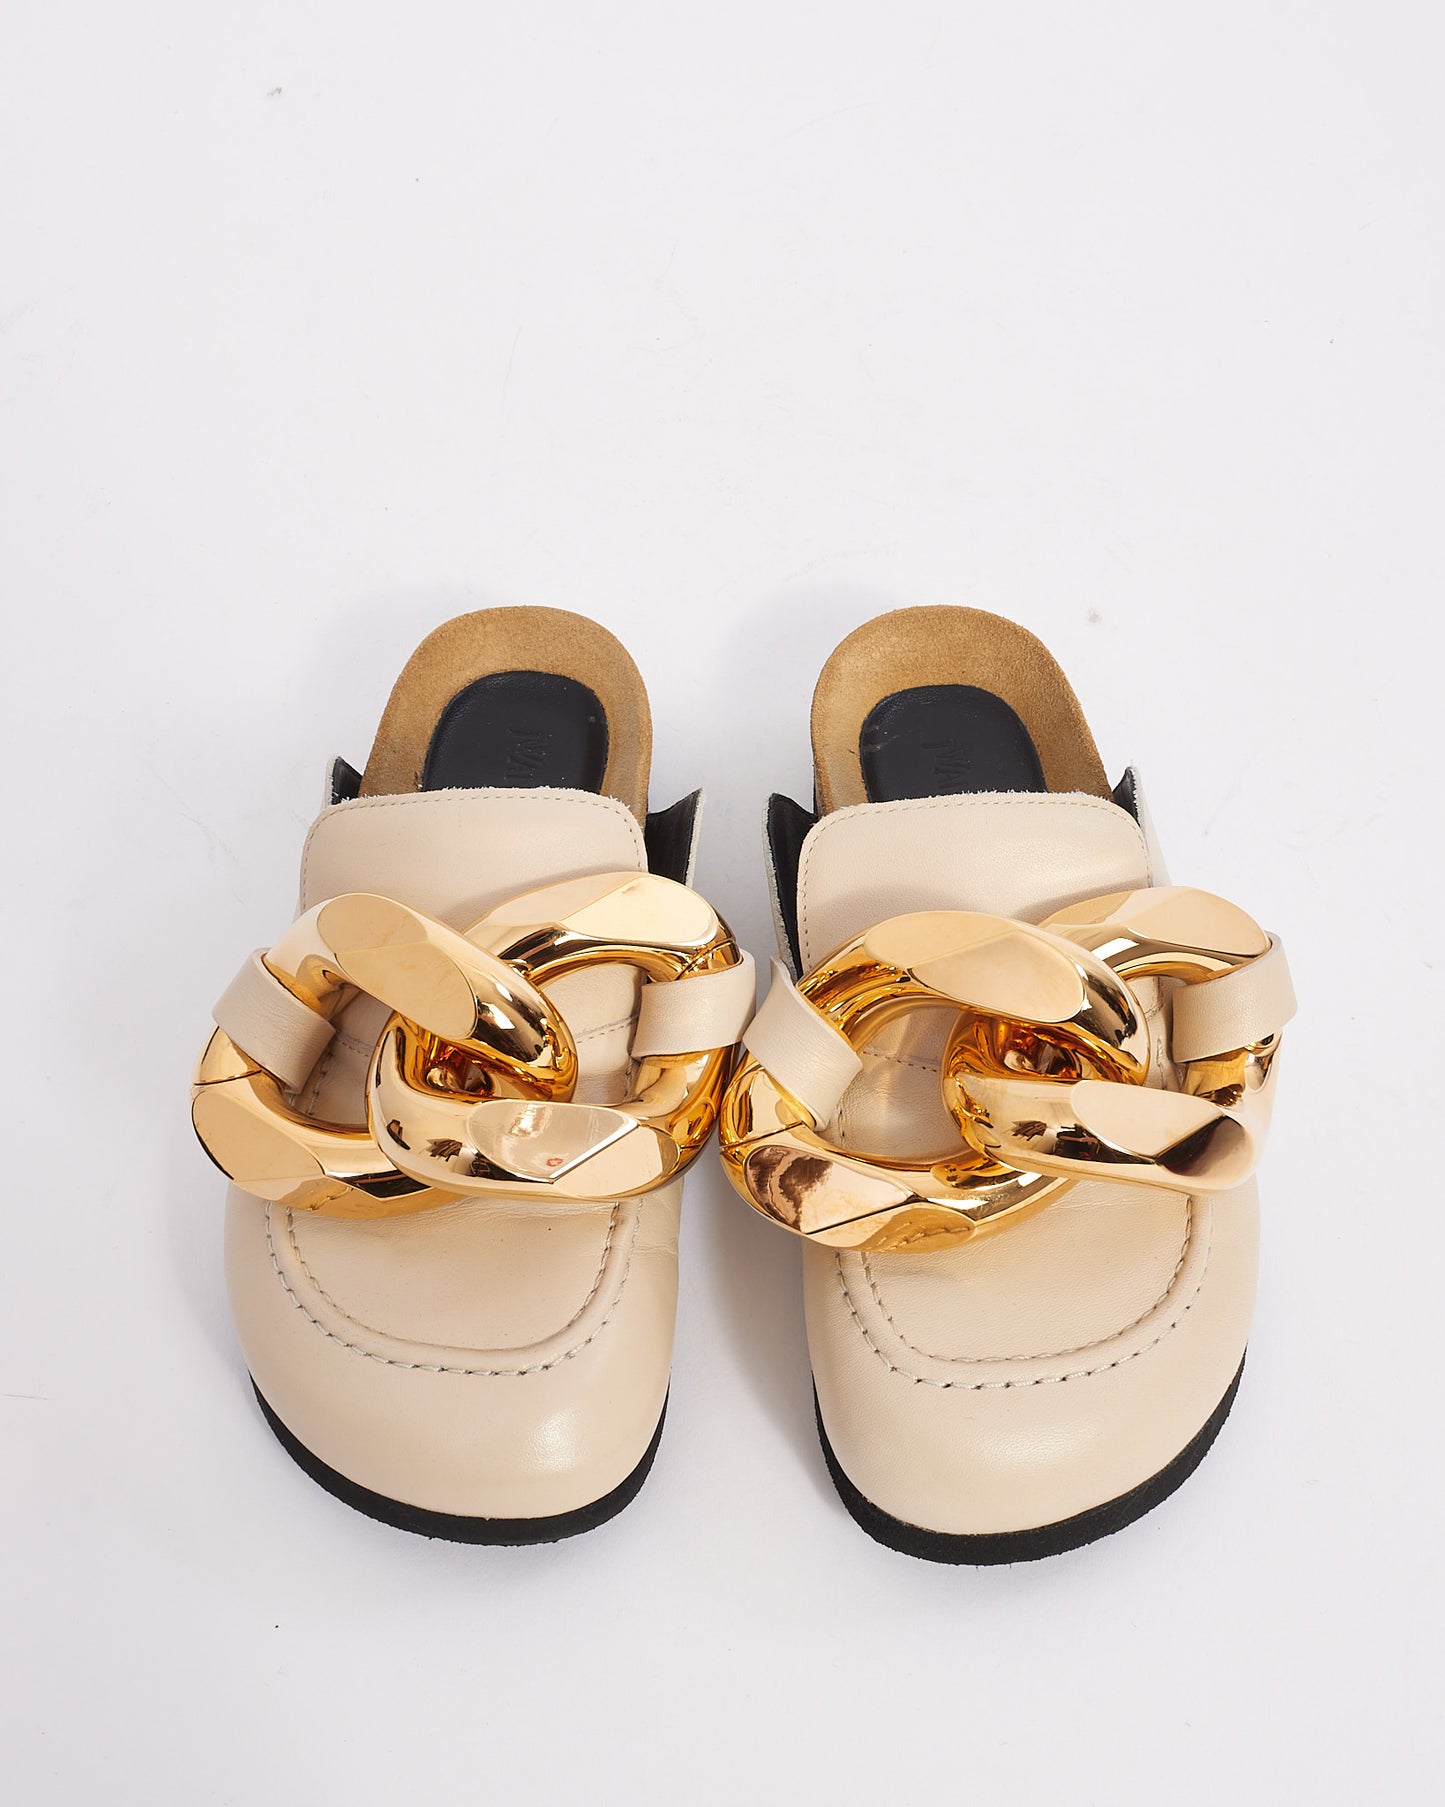 JW Anderson Beige Leather with Gold Chain Round Toe Leather Mules - 35